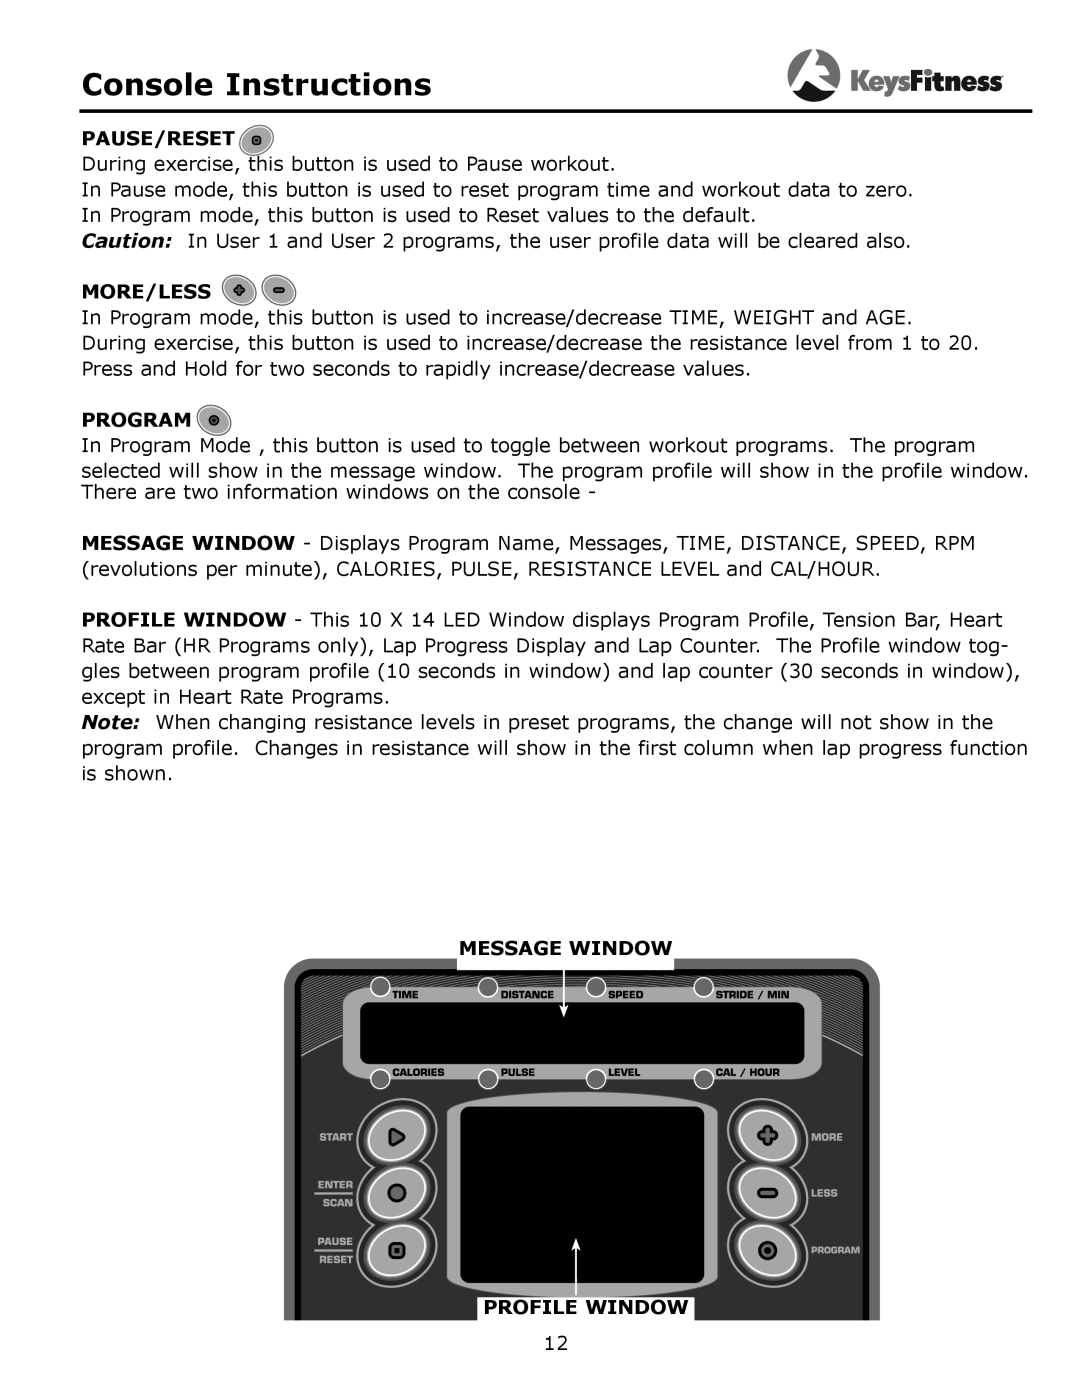 Keys Fitness 315-00106 owner manual Console Instructions, Pause/Reset, More/Less, Program, Message Window Profile Window 